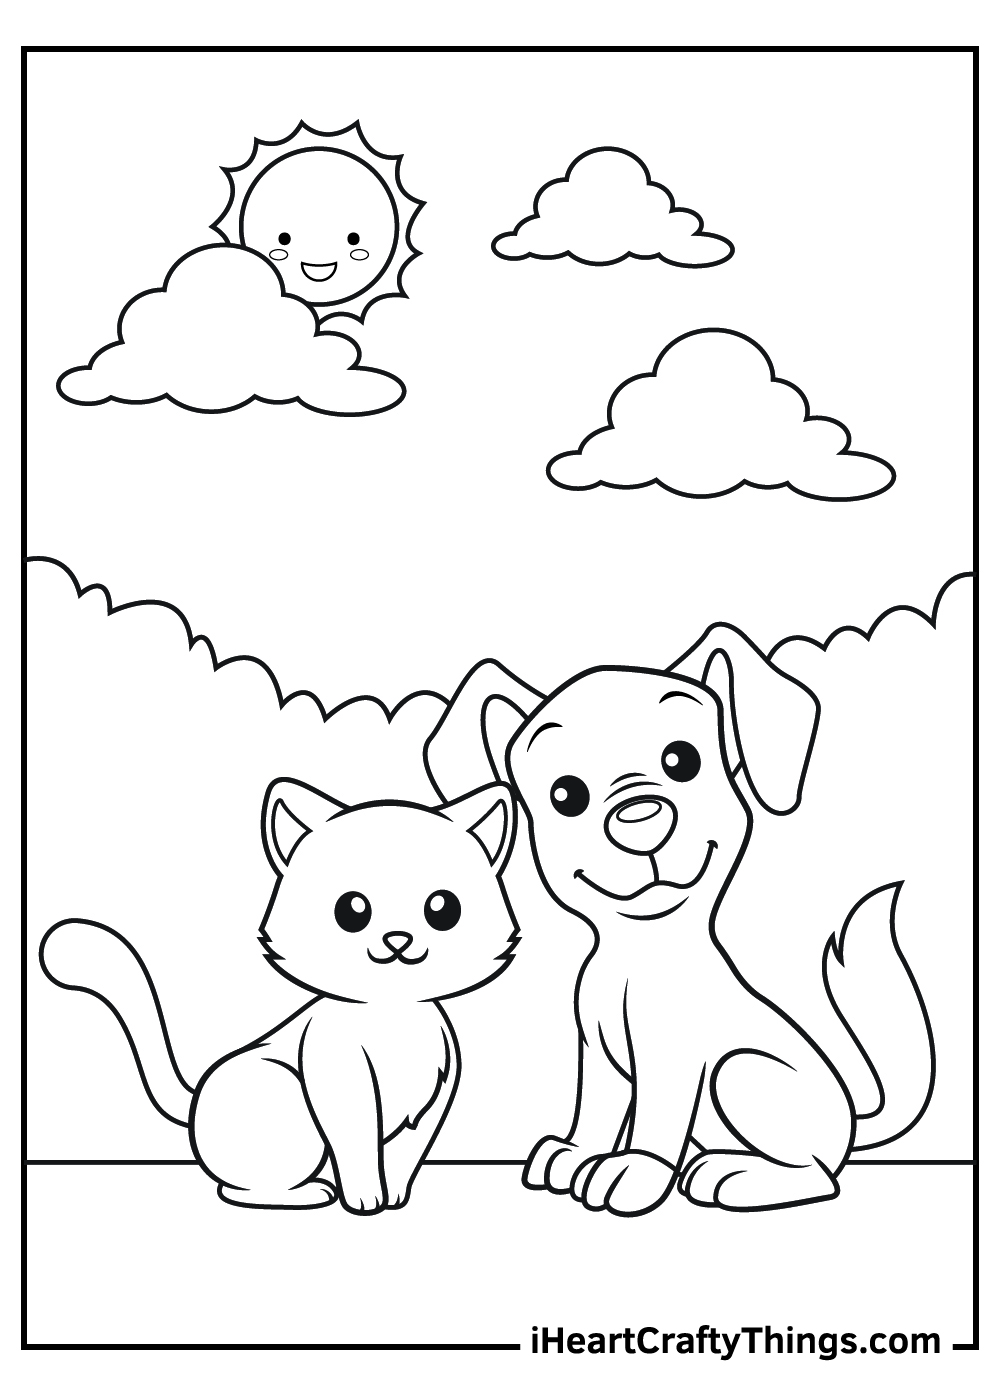 Dog and cat coloring pages free printables